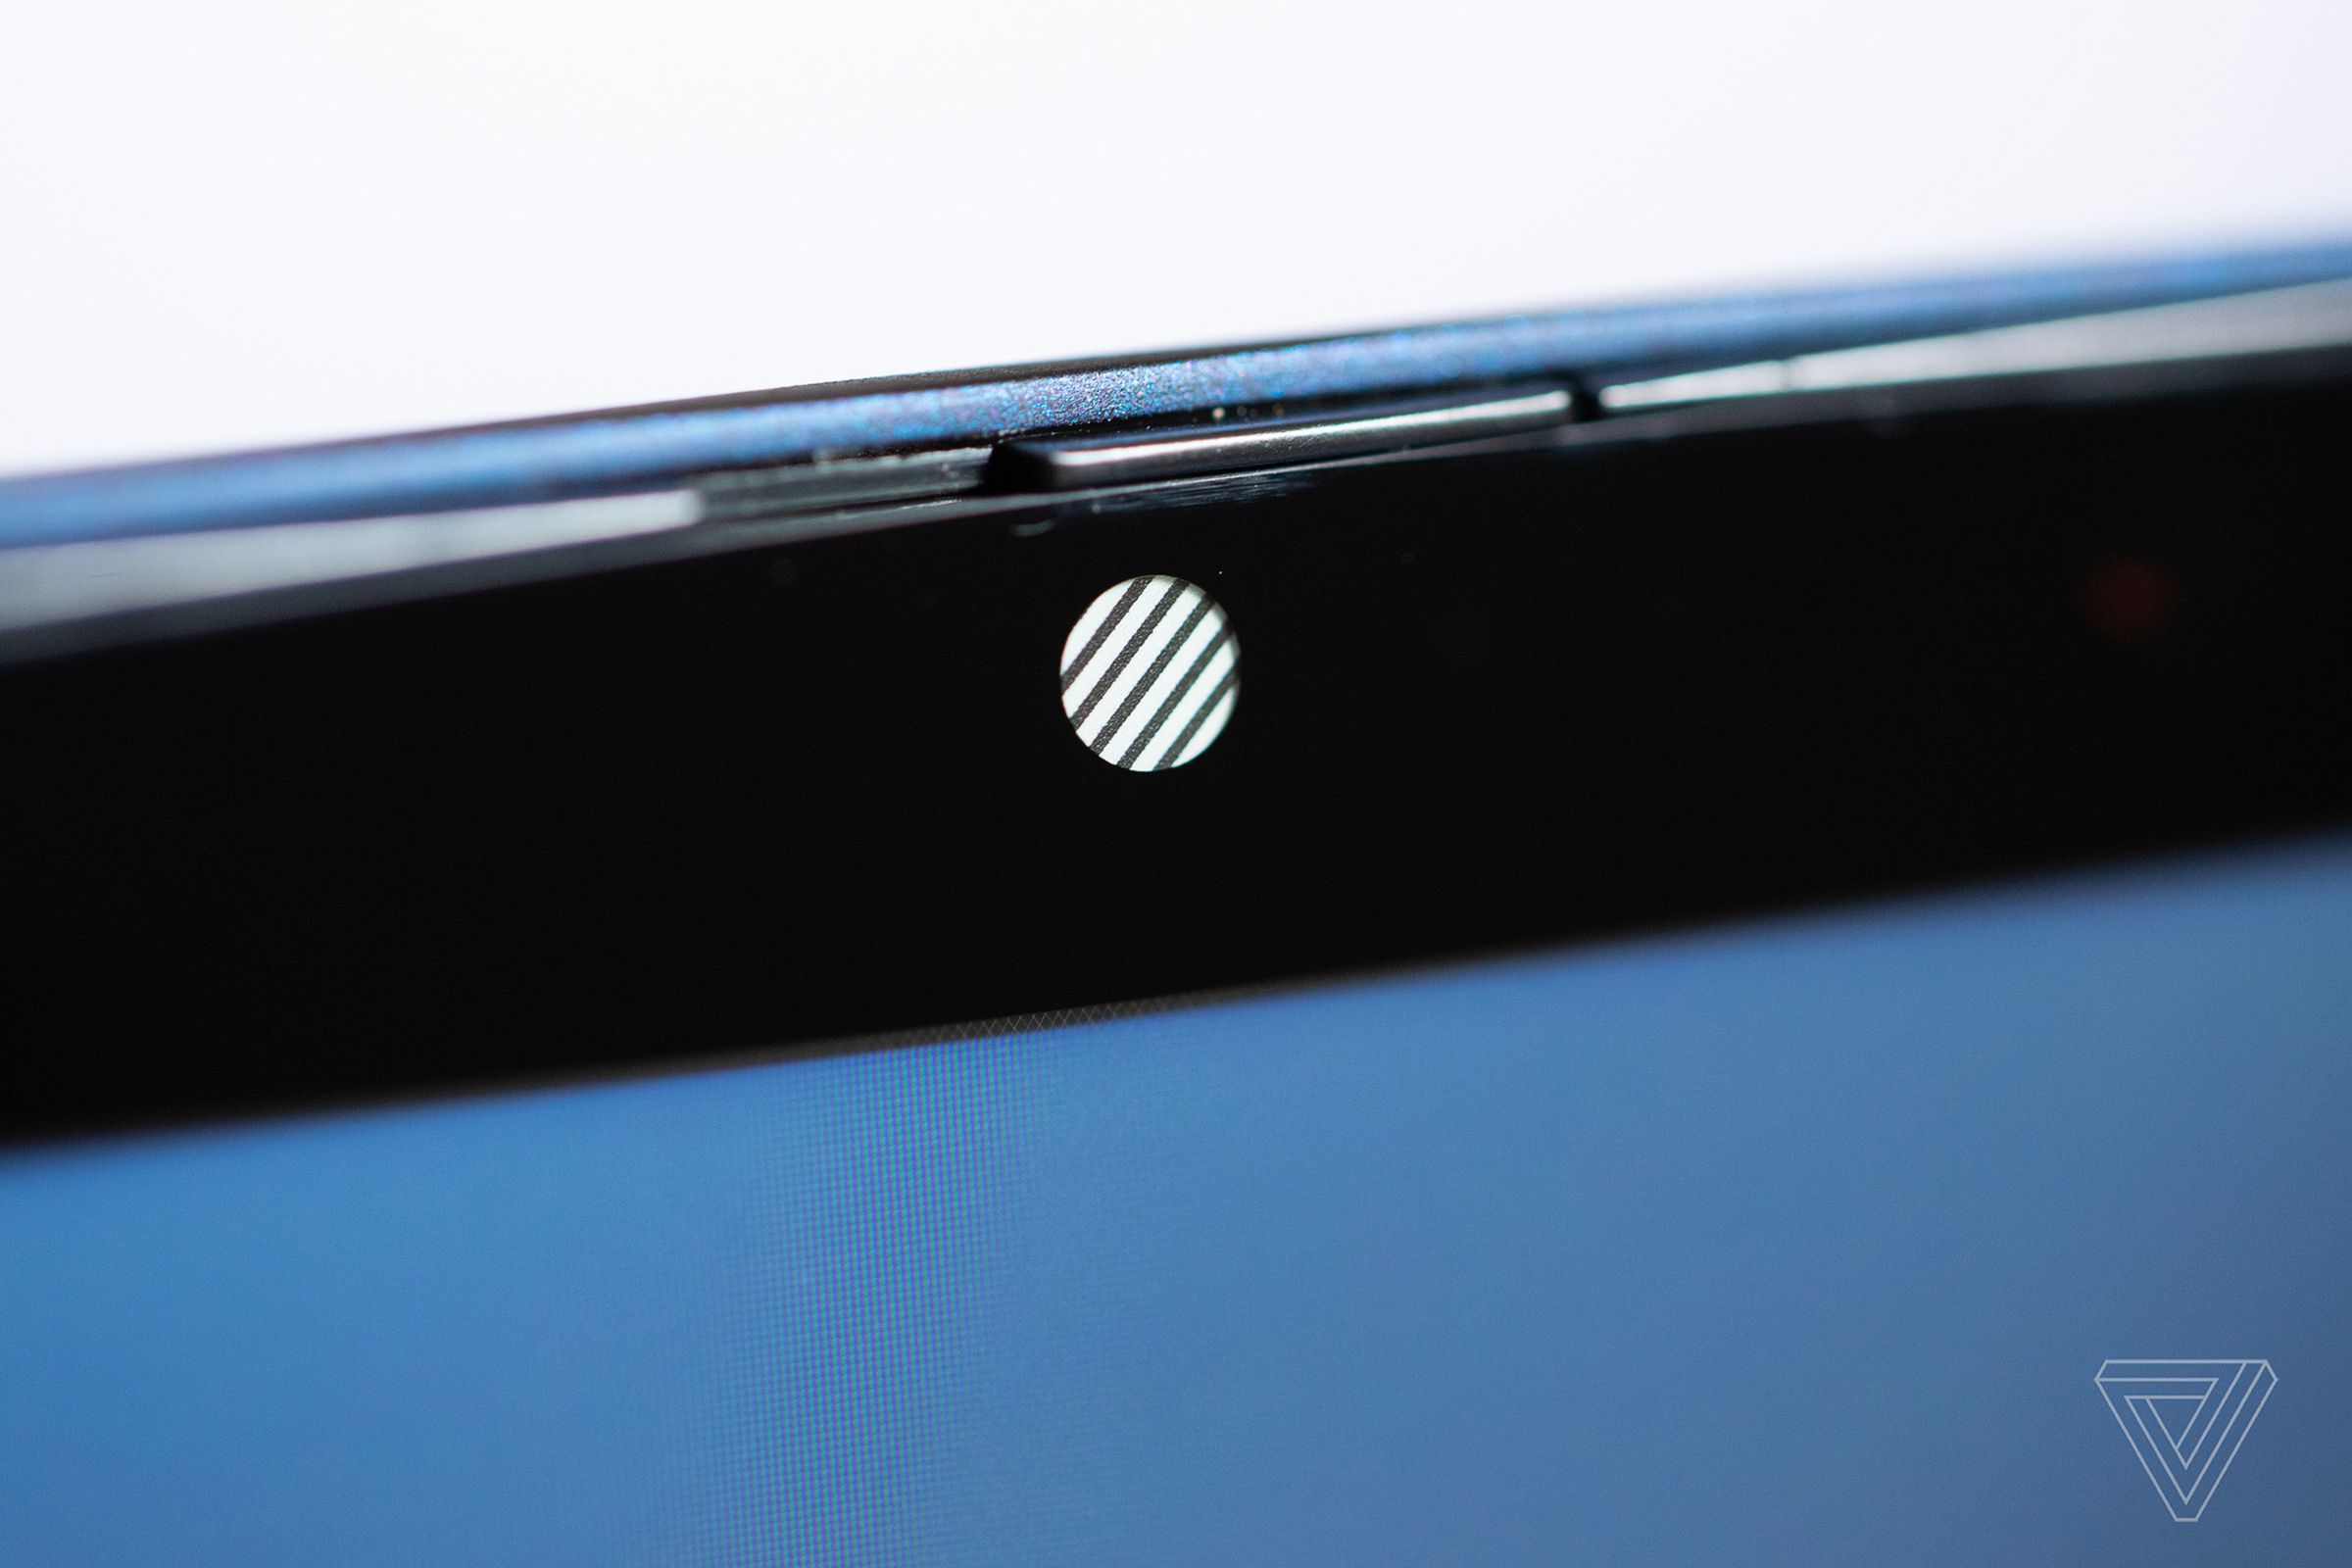 The HP Elite Dragonfly’s webcam and privacy shutter.